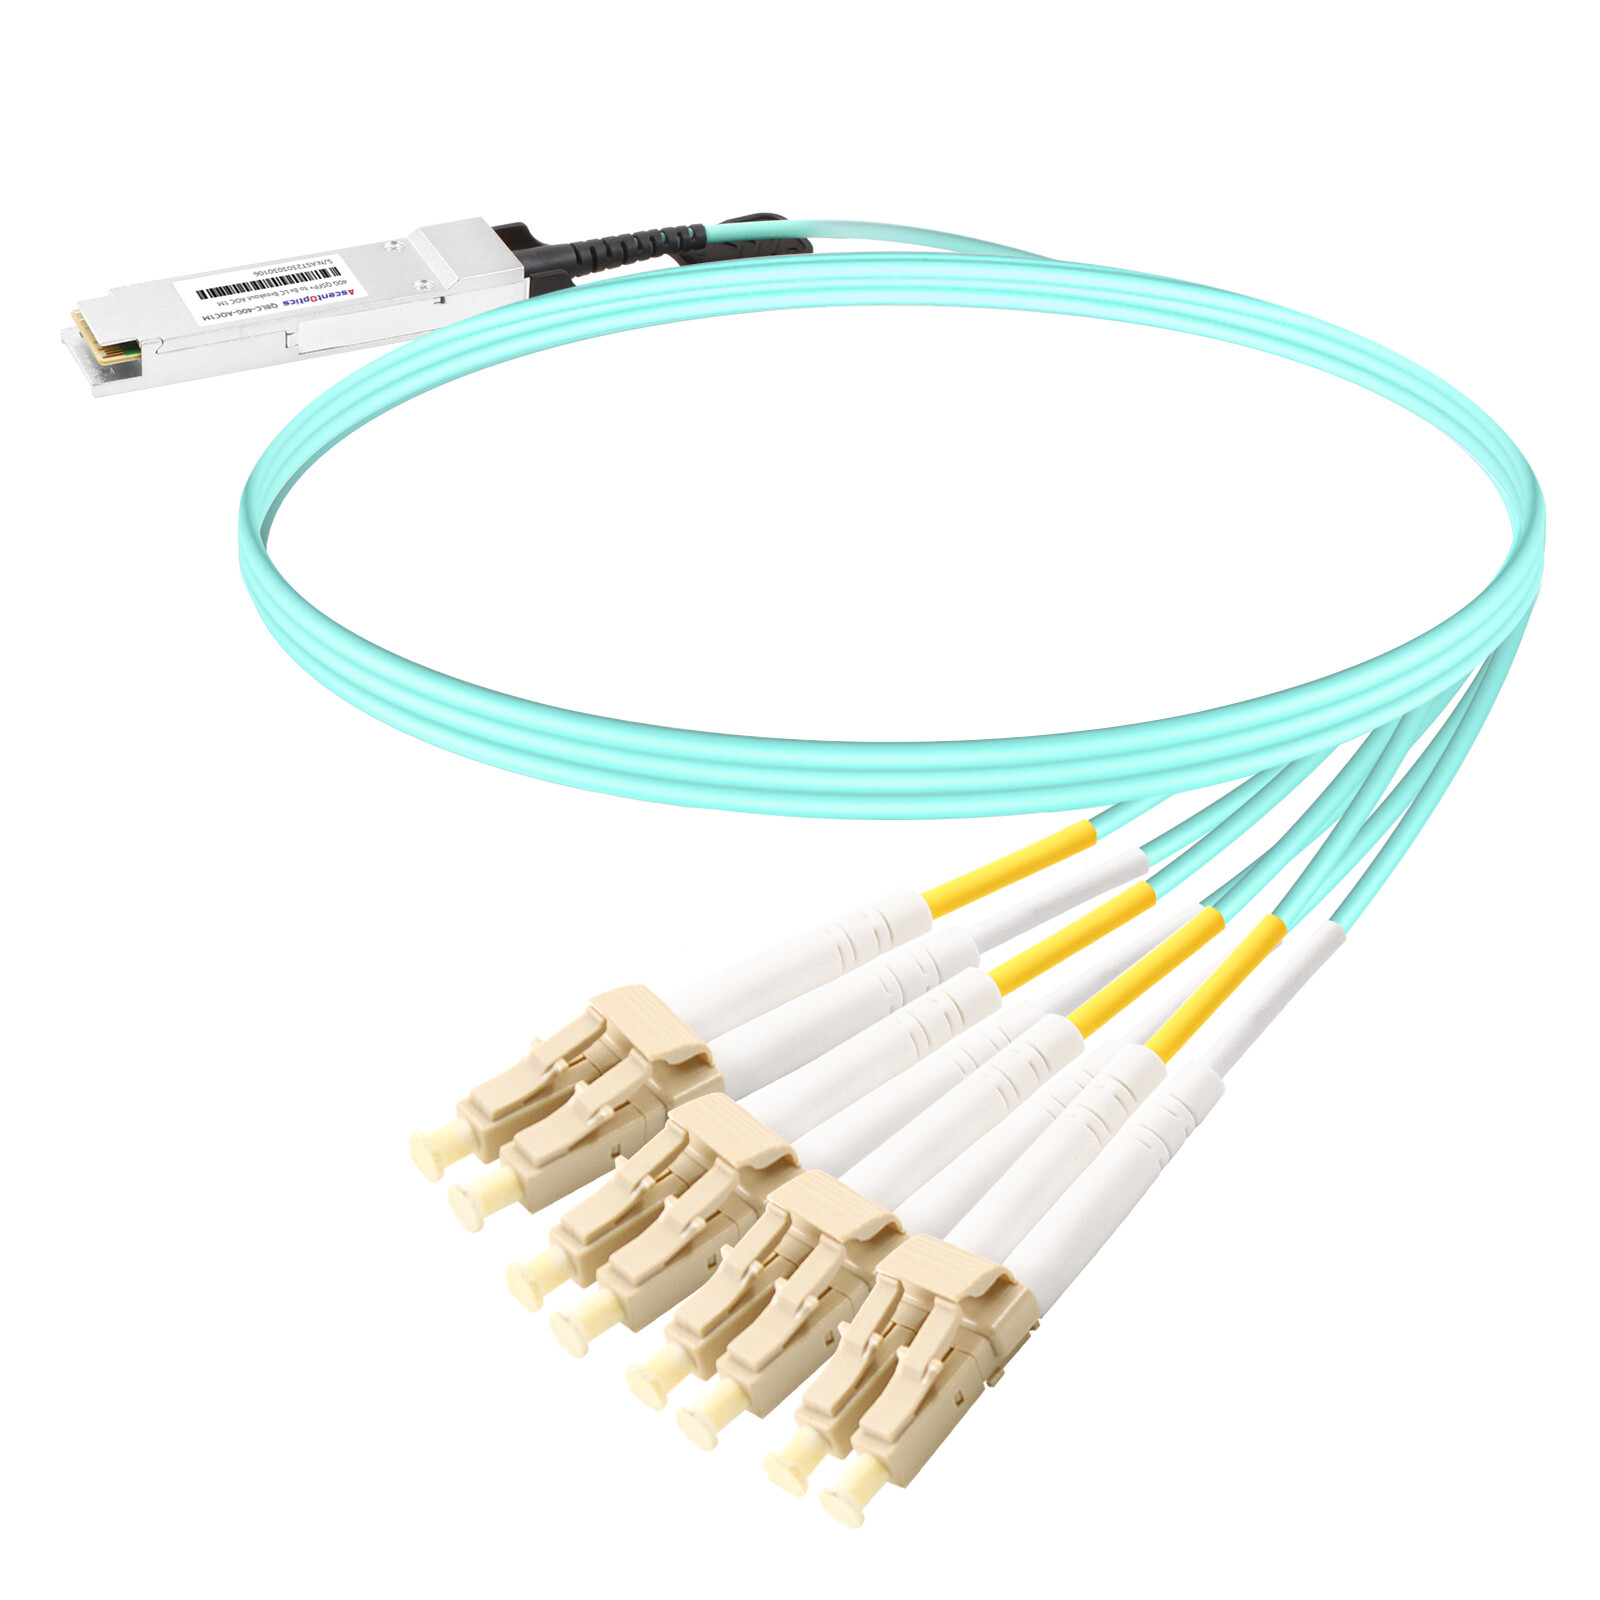 40G QSFP+ to 8x LC Breakout AOC Cable,xx Meter